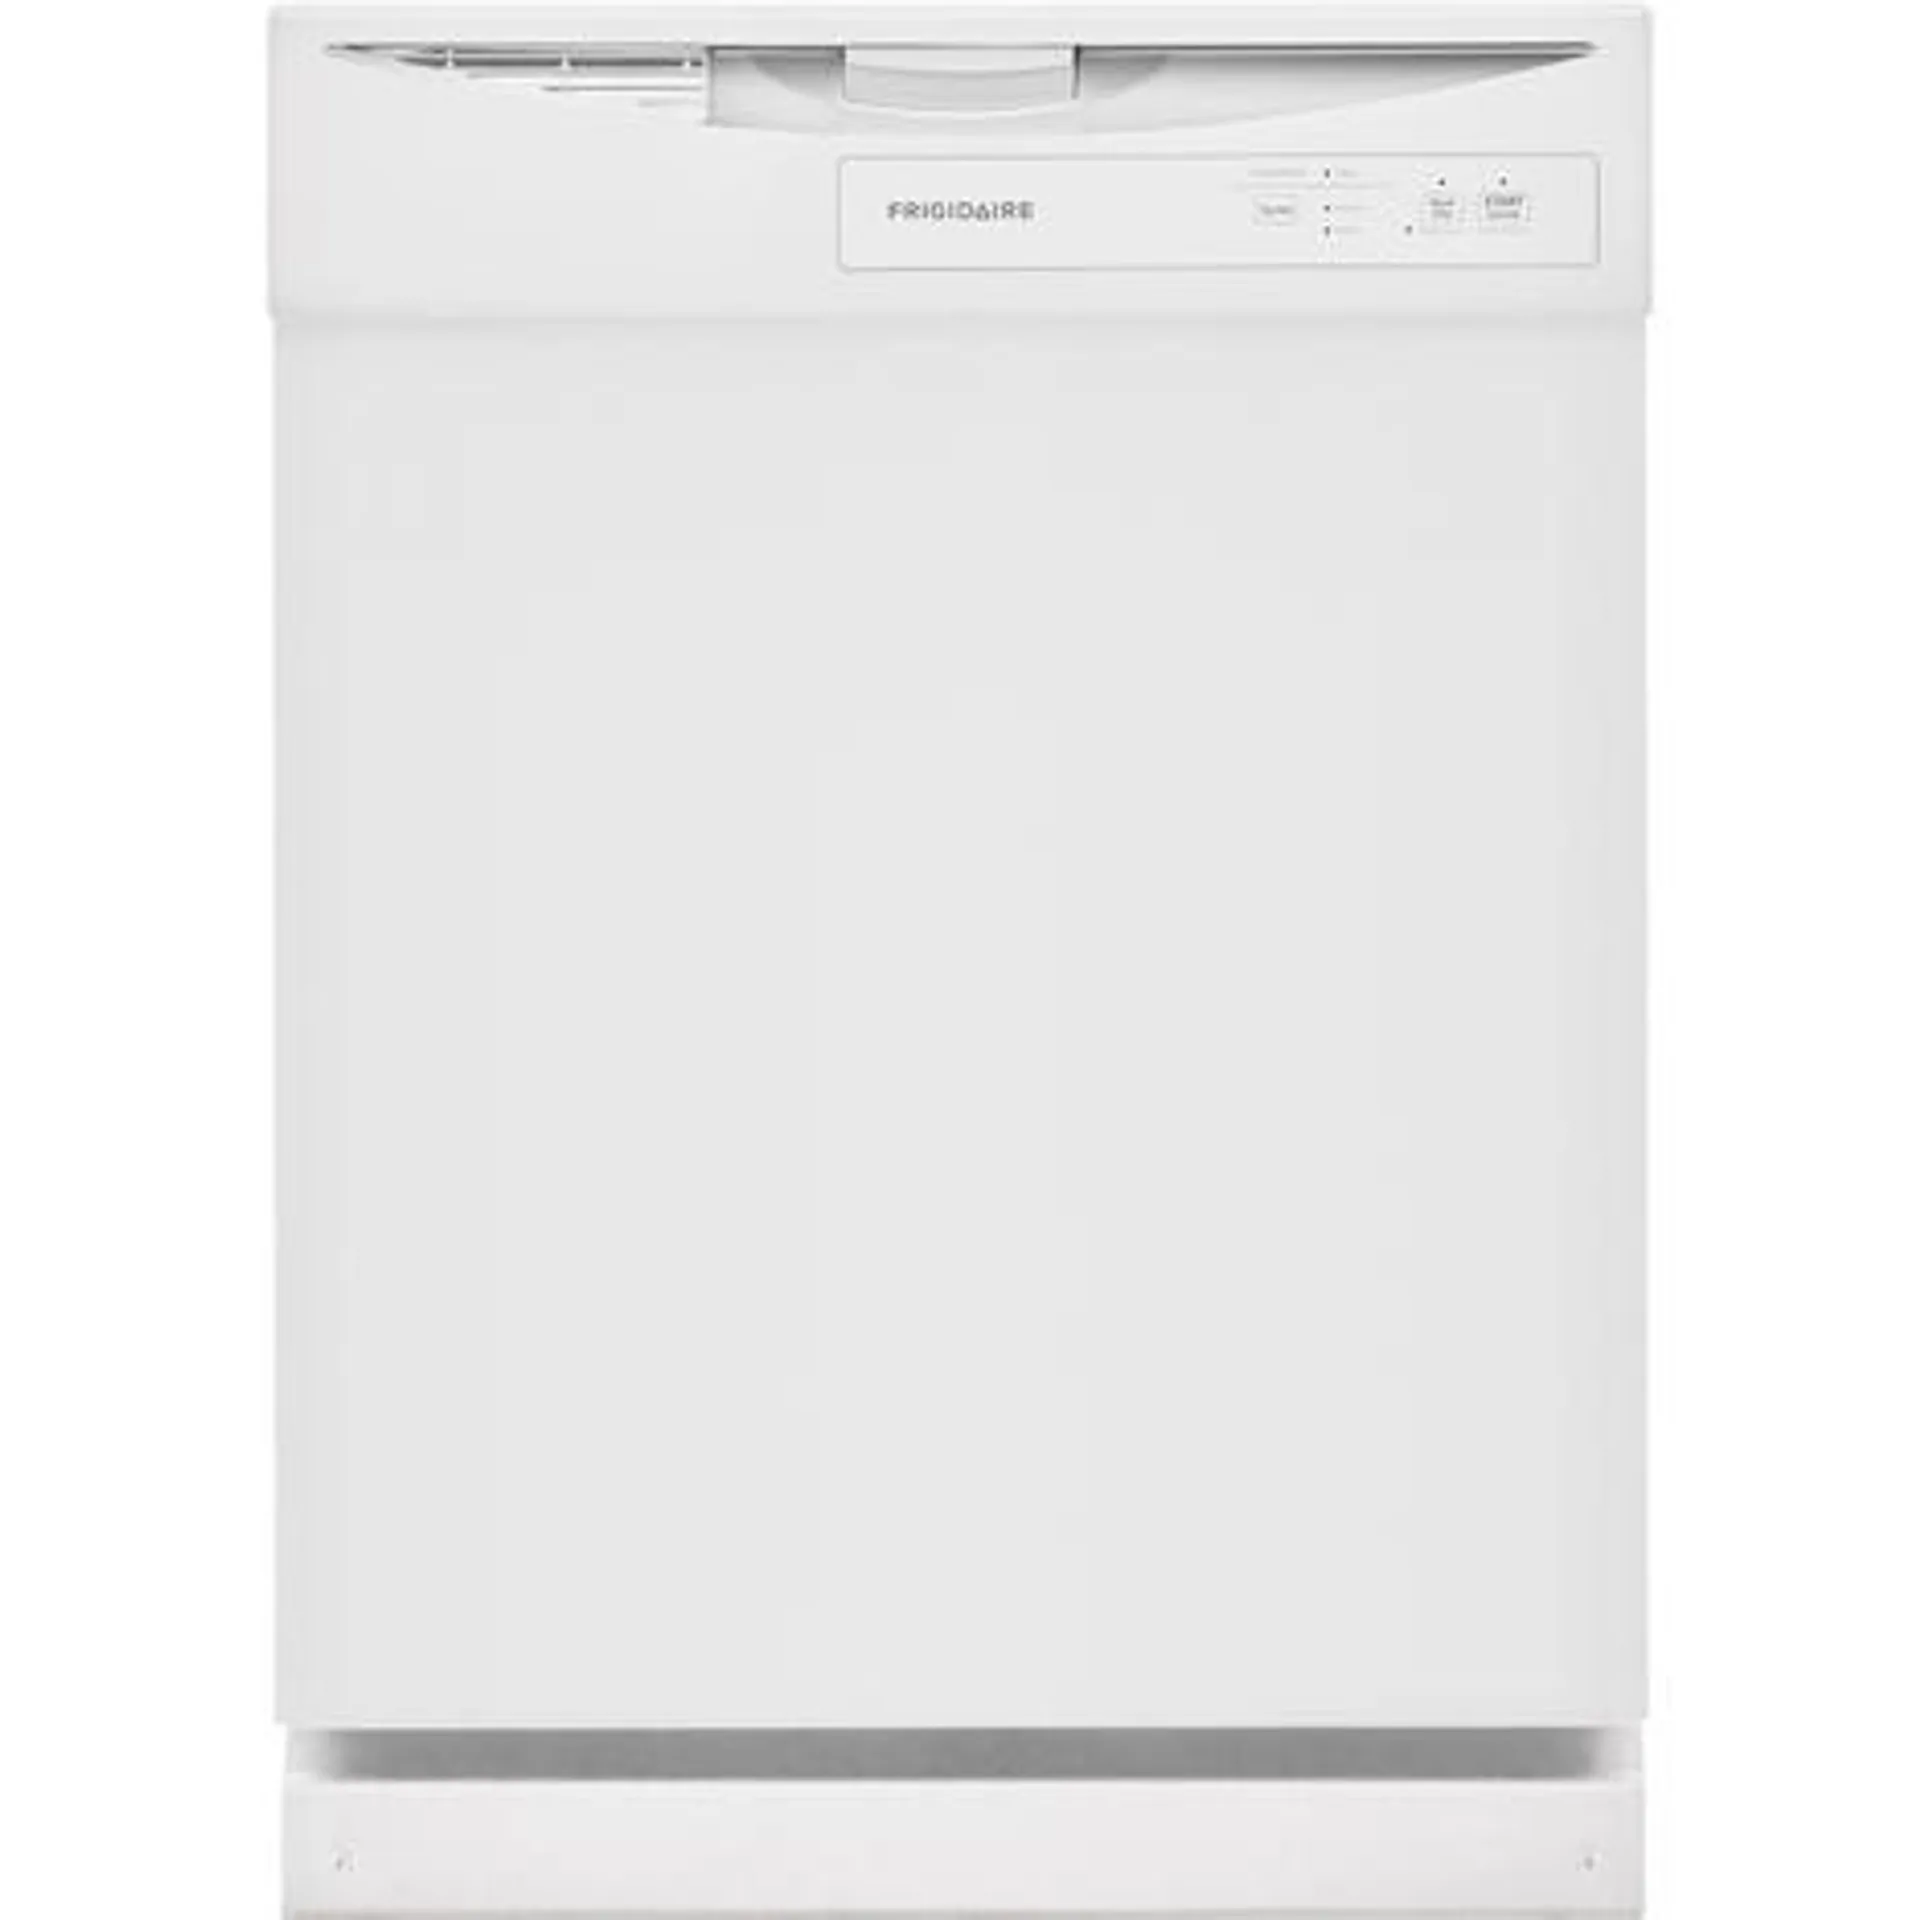 Frigidaire FDPC4221AW 24'' Built-In Dishwasher with 5-Level Wash System – White